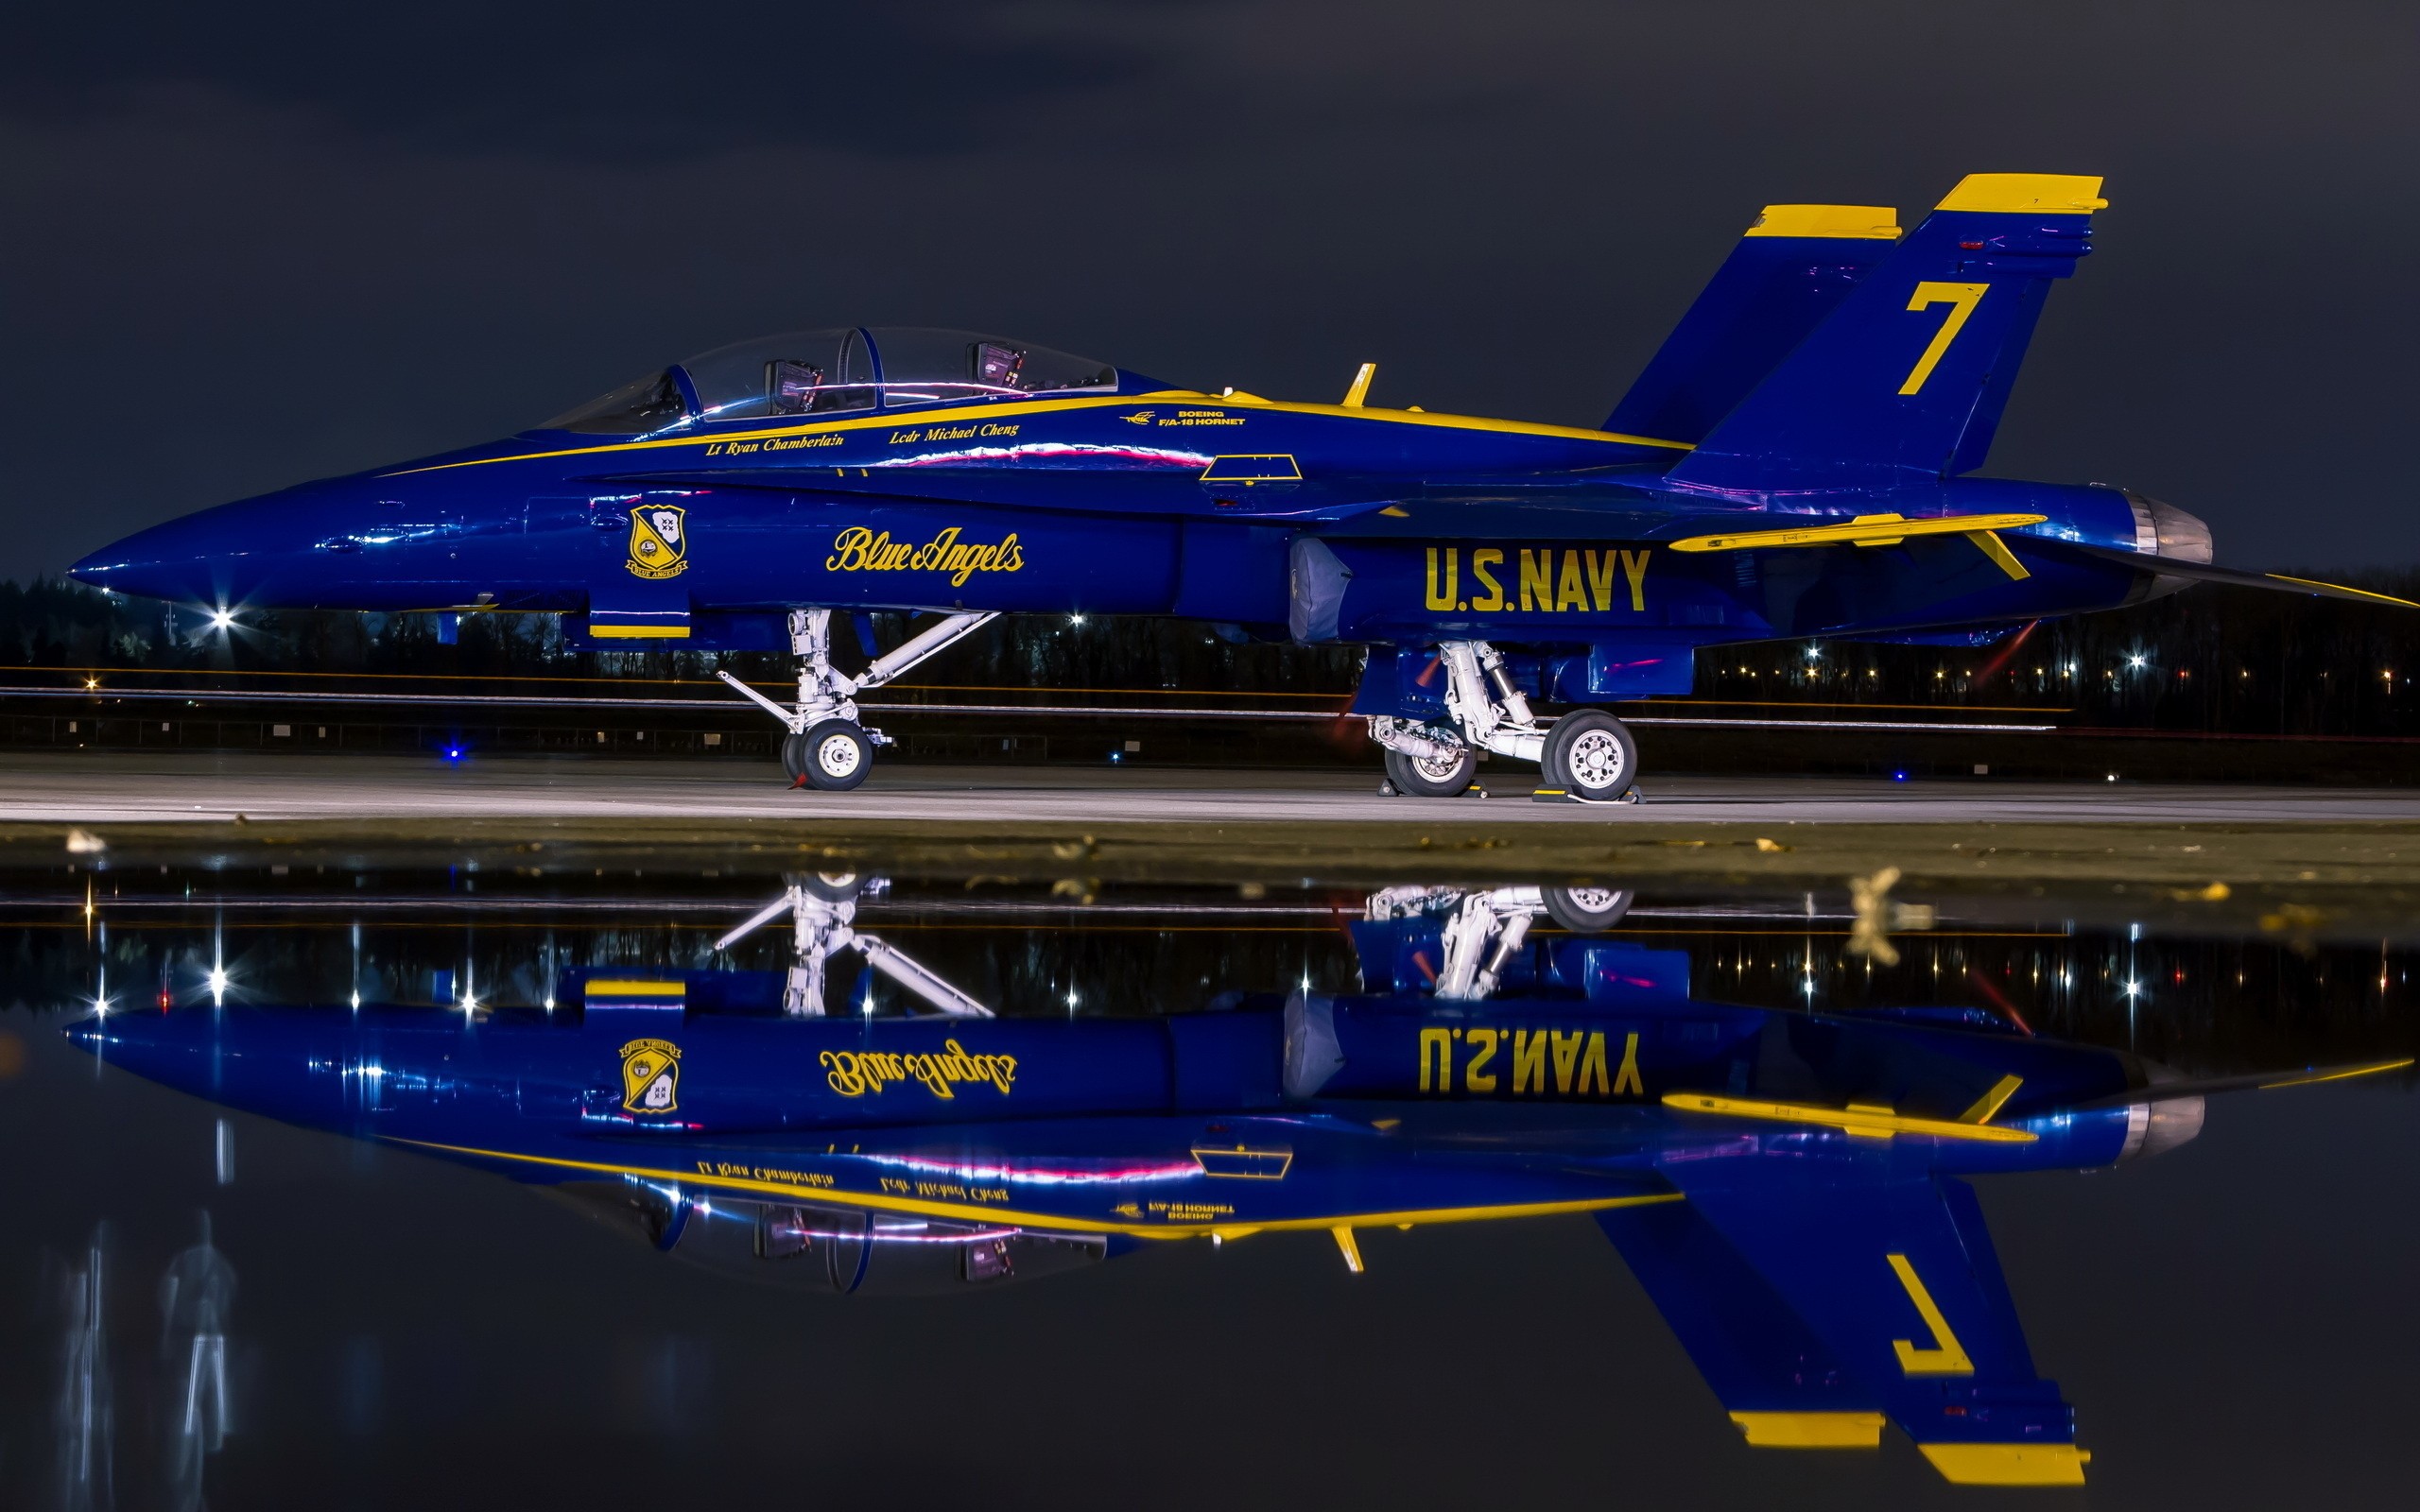 General 2560x1600 McDonnell Douglas F/A-18 Hornet Blue Angels reflection airshows military aircraft aircraft military vehicle vehicle United States Navy McDonnell Douglas dark night American aircraft side view jet fighter